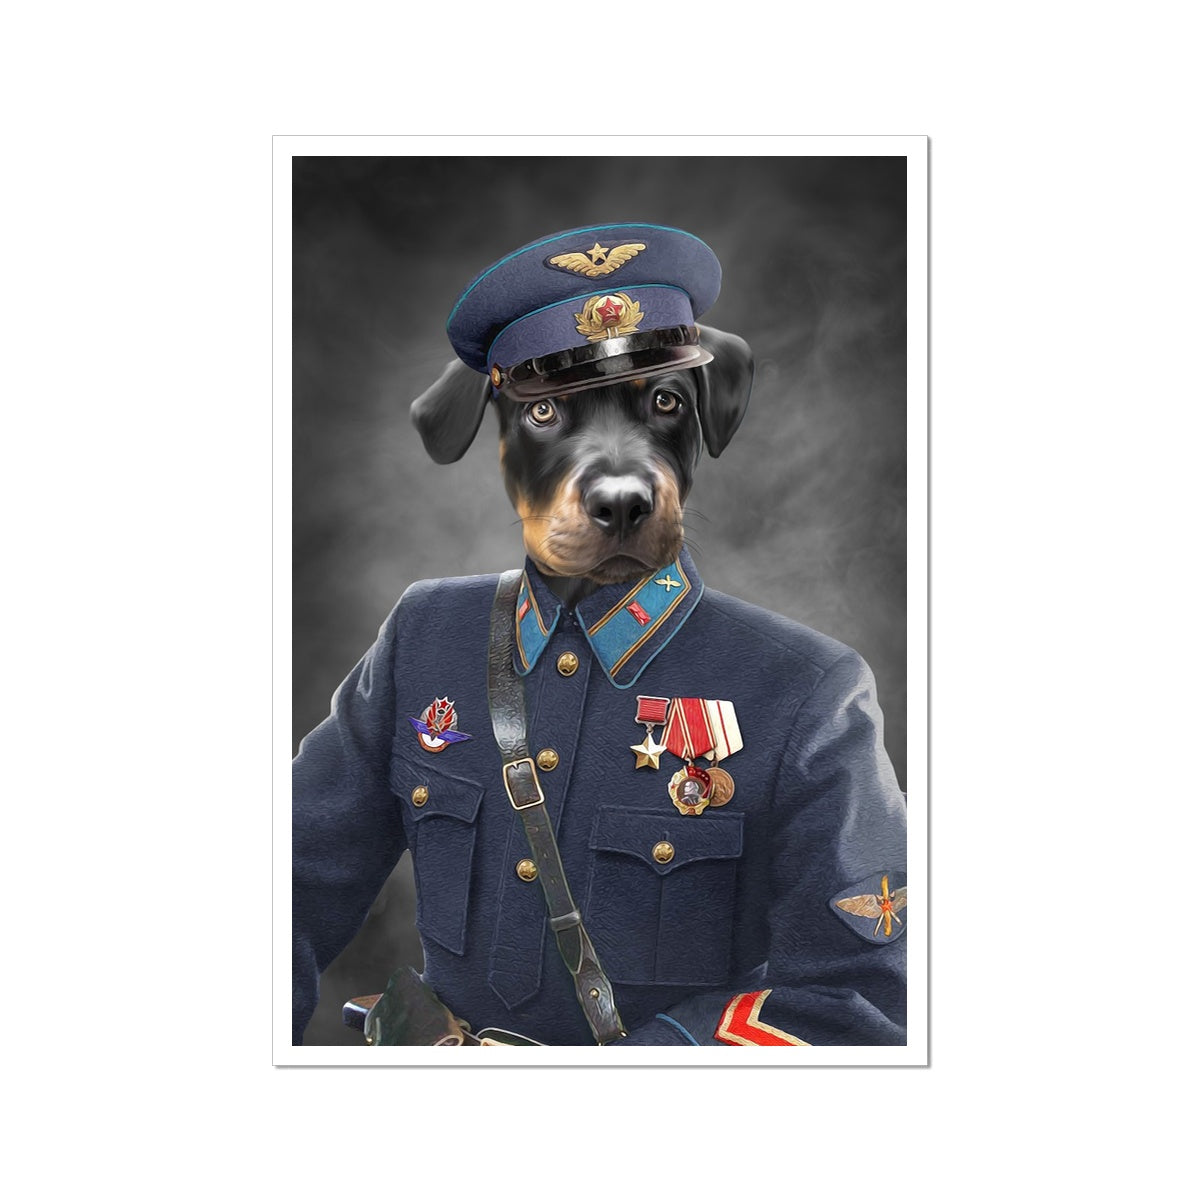 The Decorated Soldier: Custom Pet Poster